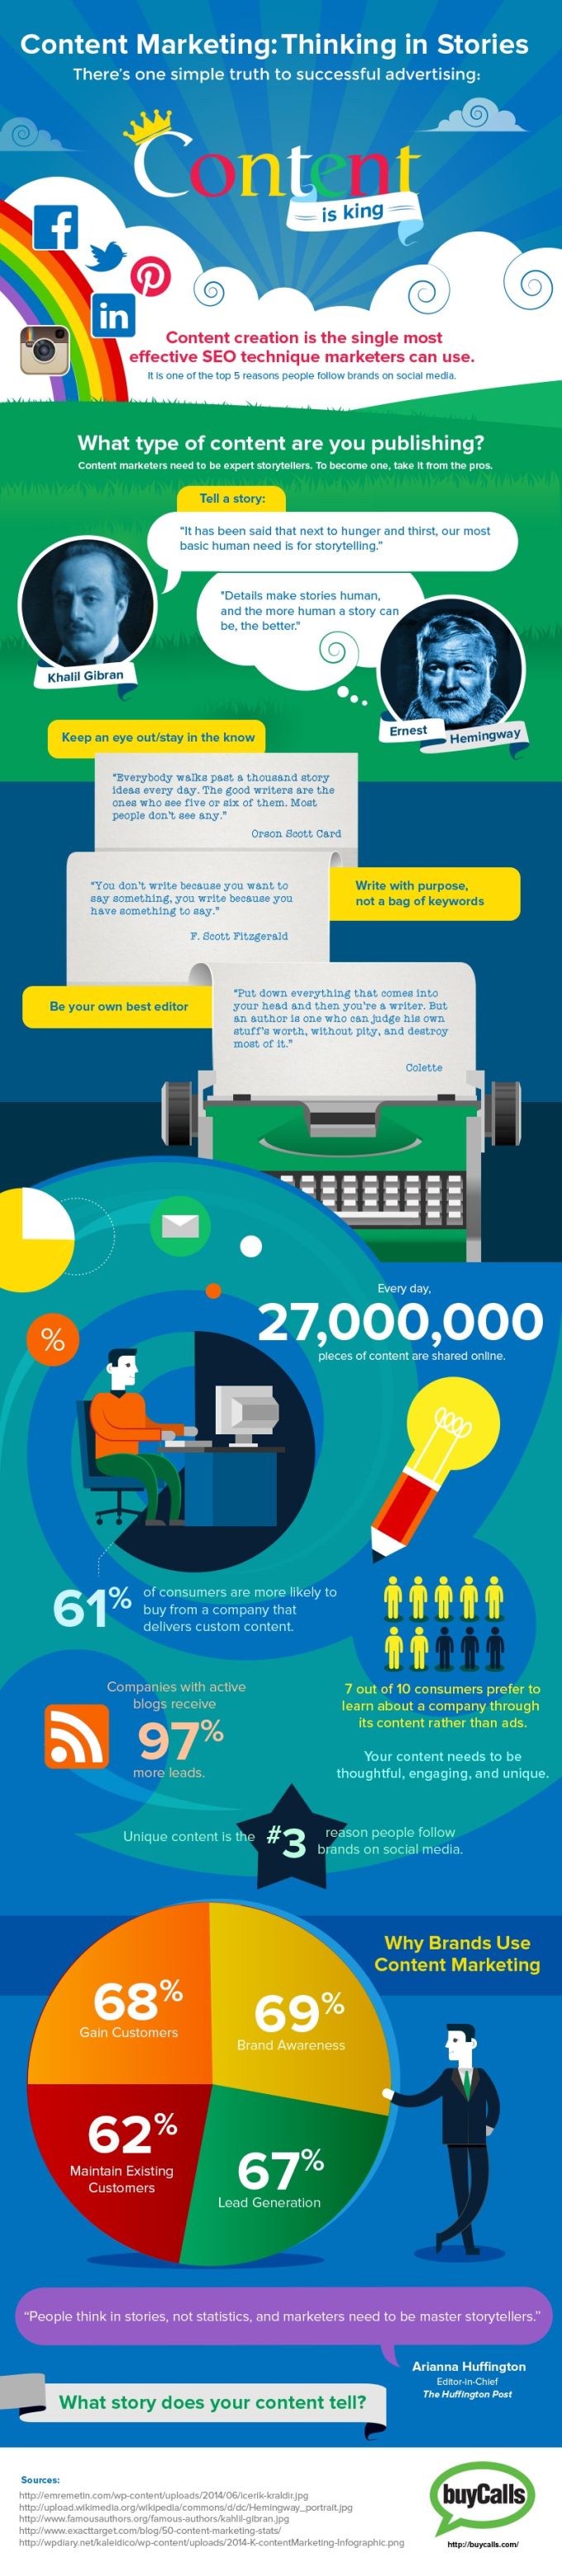 image-infographic-content-marketing